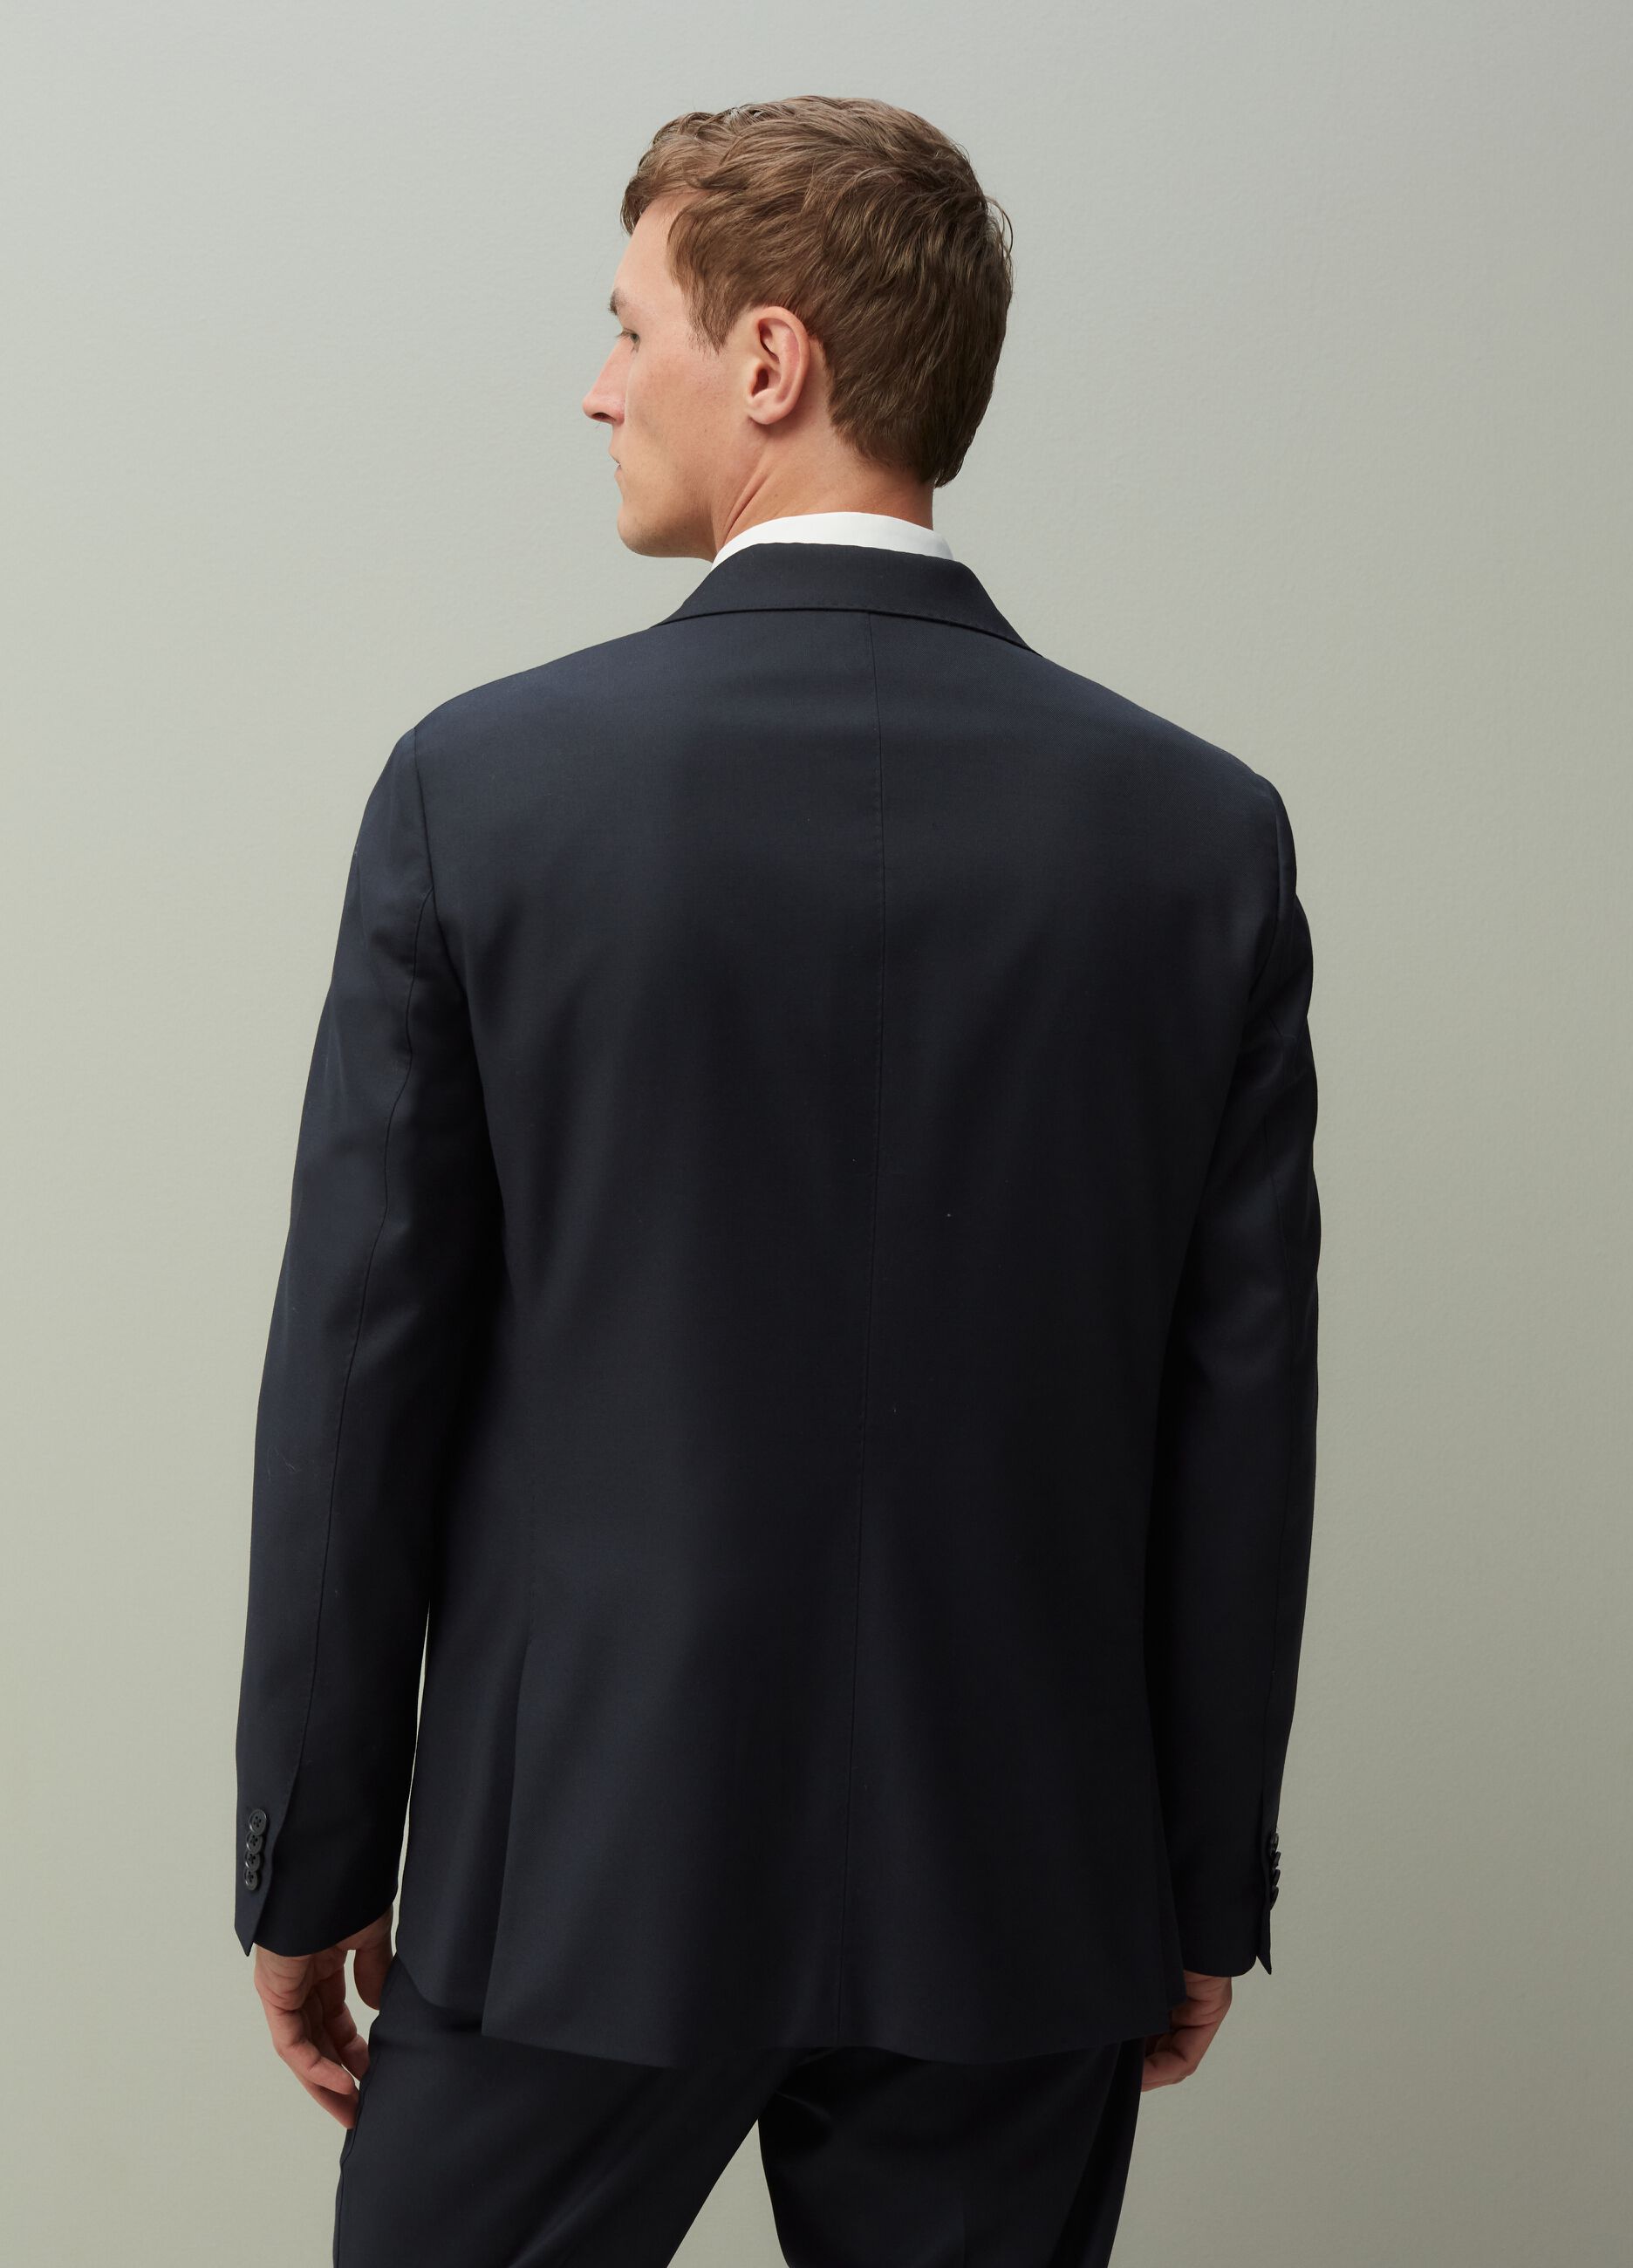 Double-breasted formal blazer in navy blue